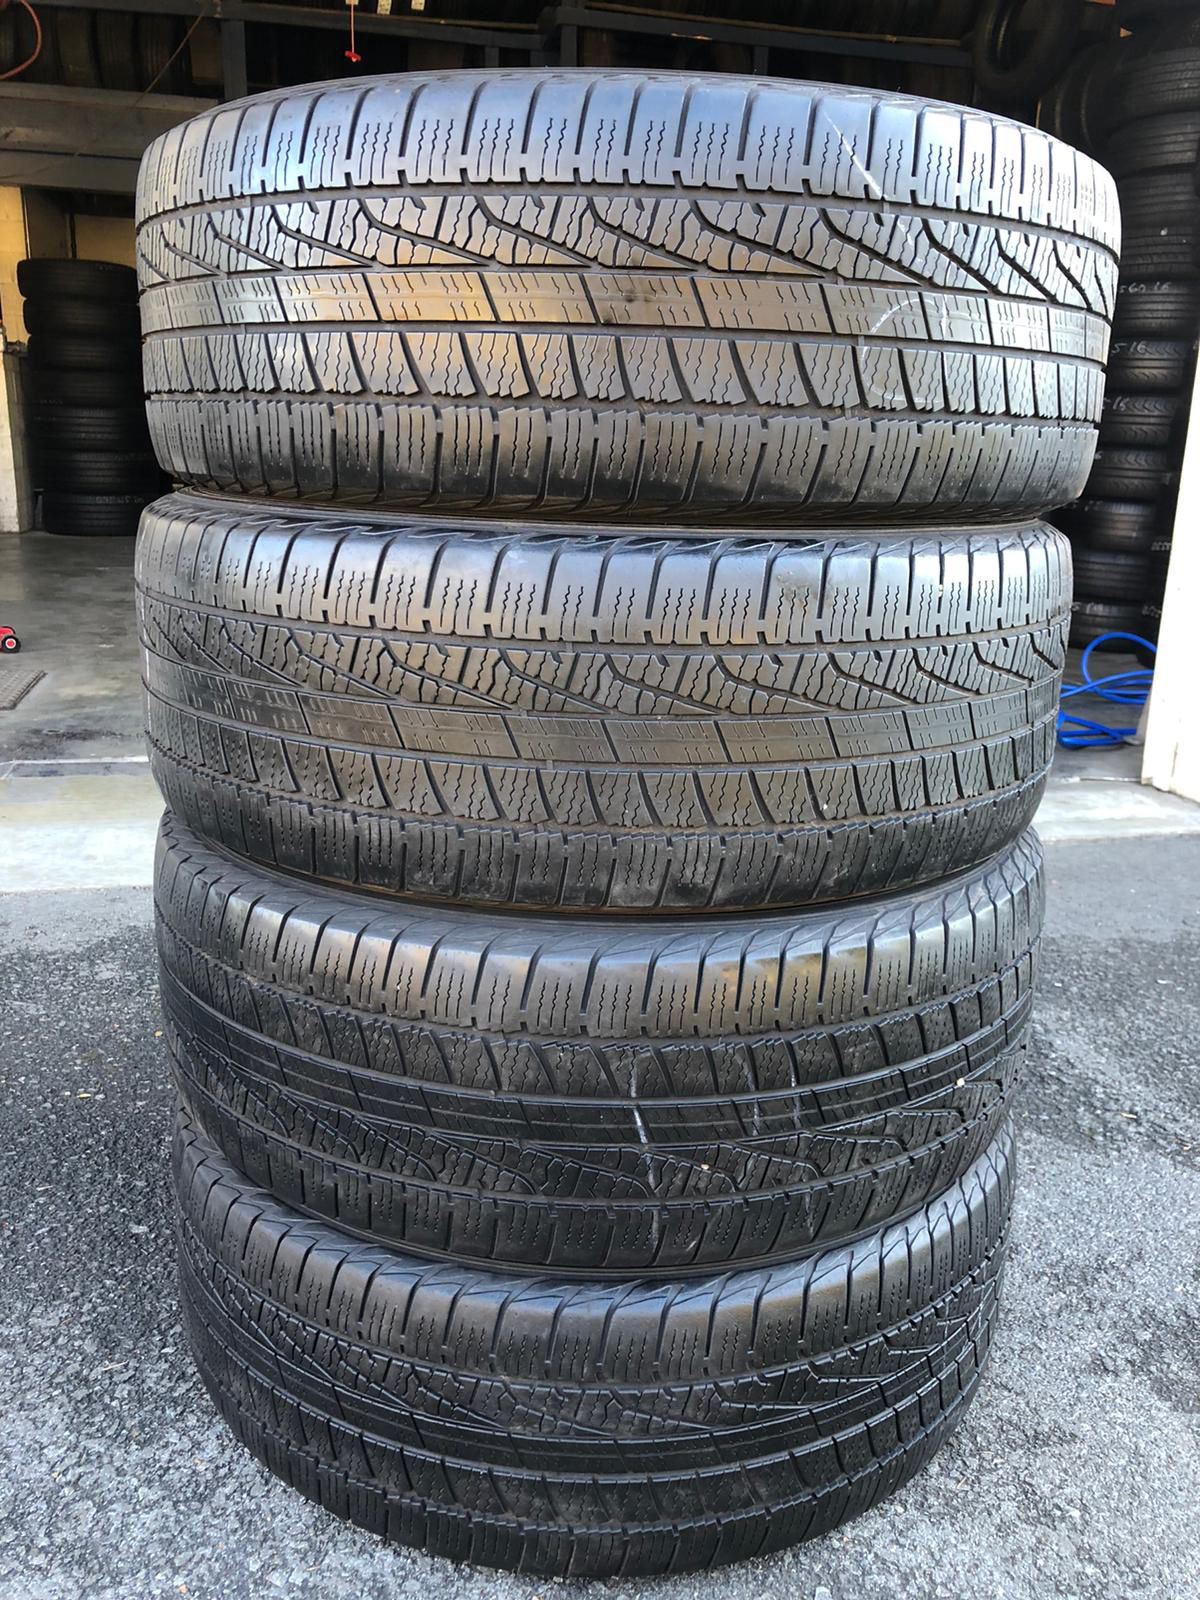 Used tires 235/55/19 good year mount and balance includes $180